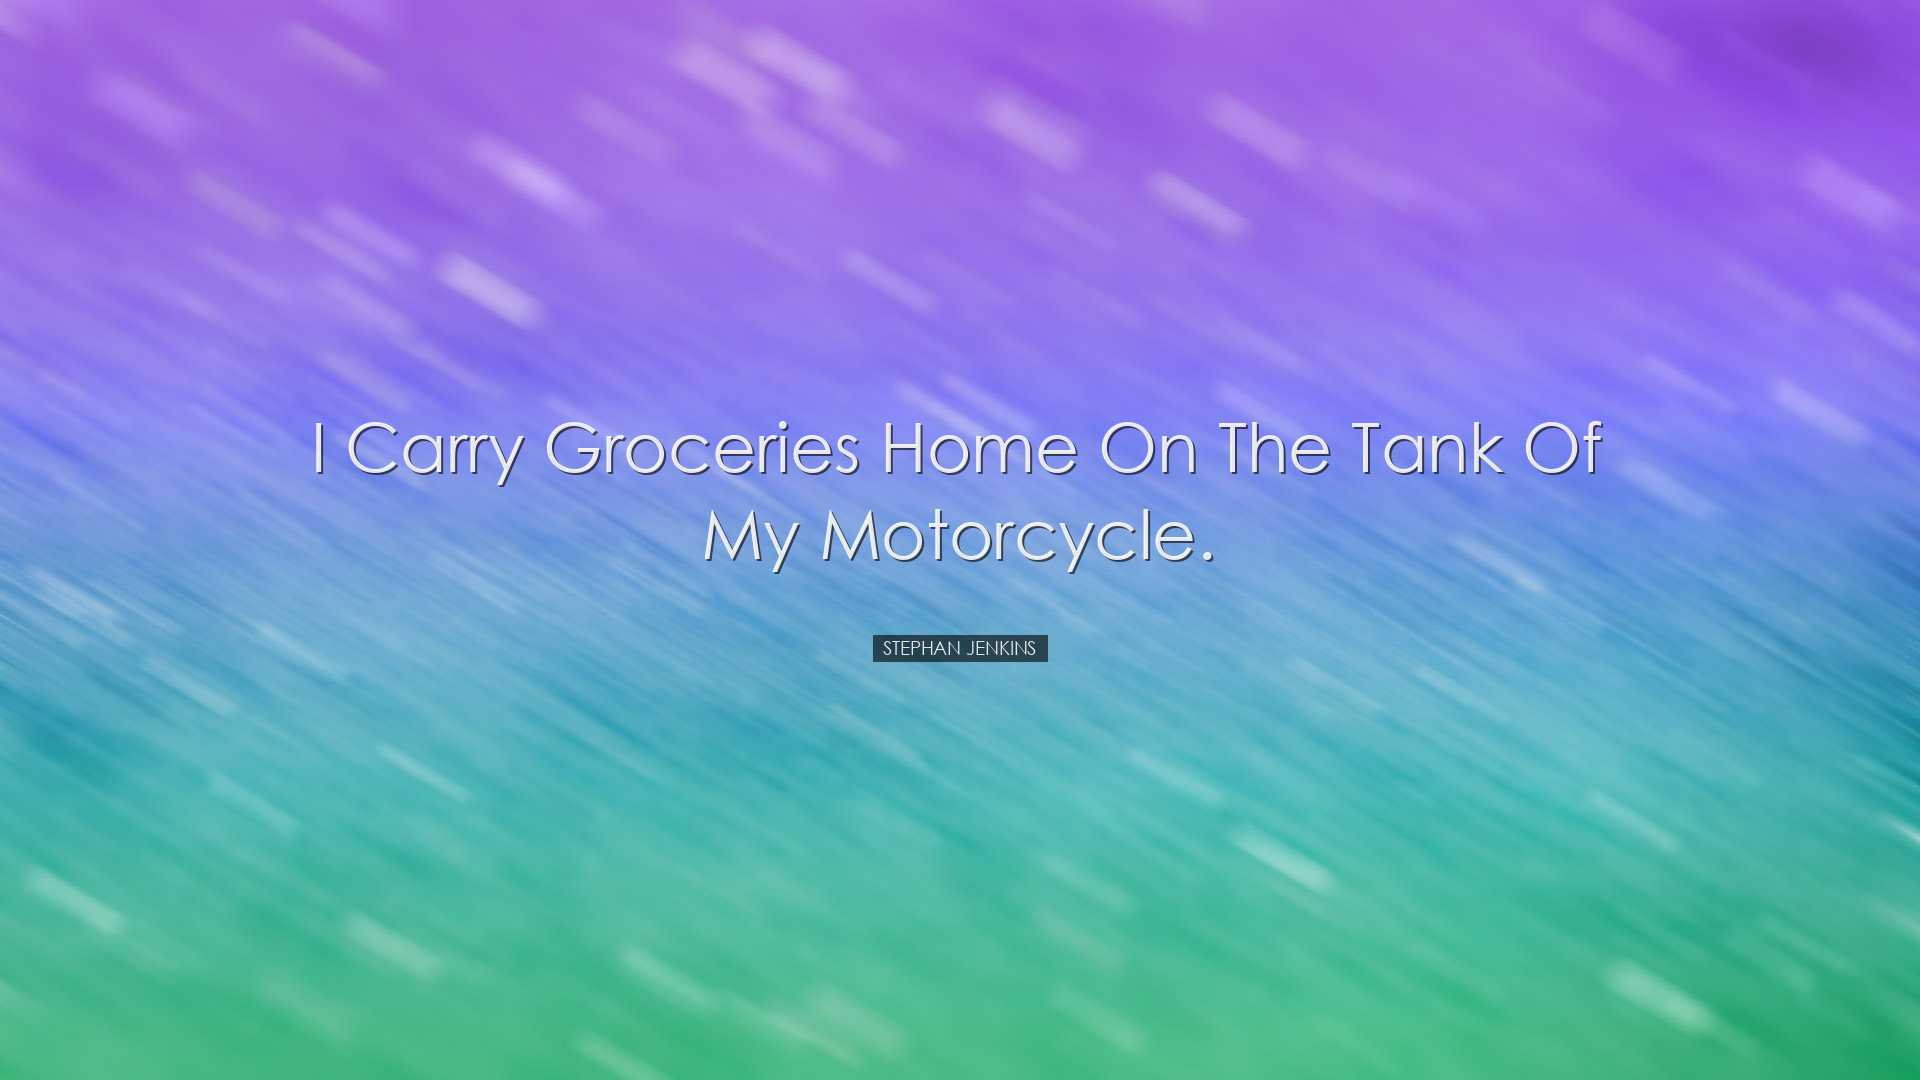 I carry groceries home on the tank of my motorcycle. - Stephan Jen